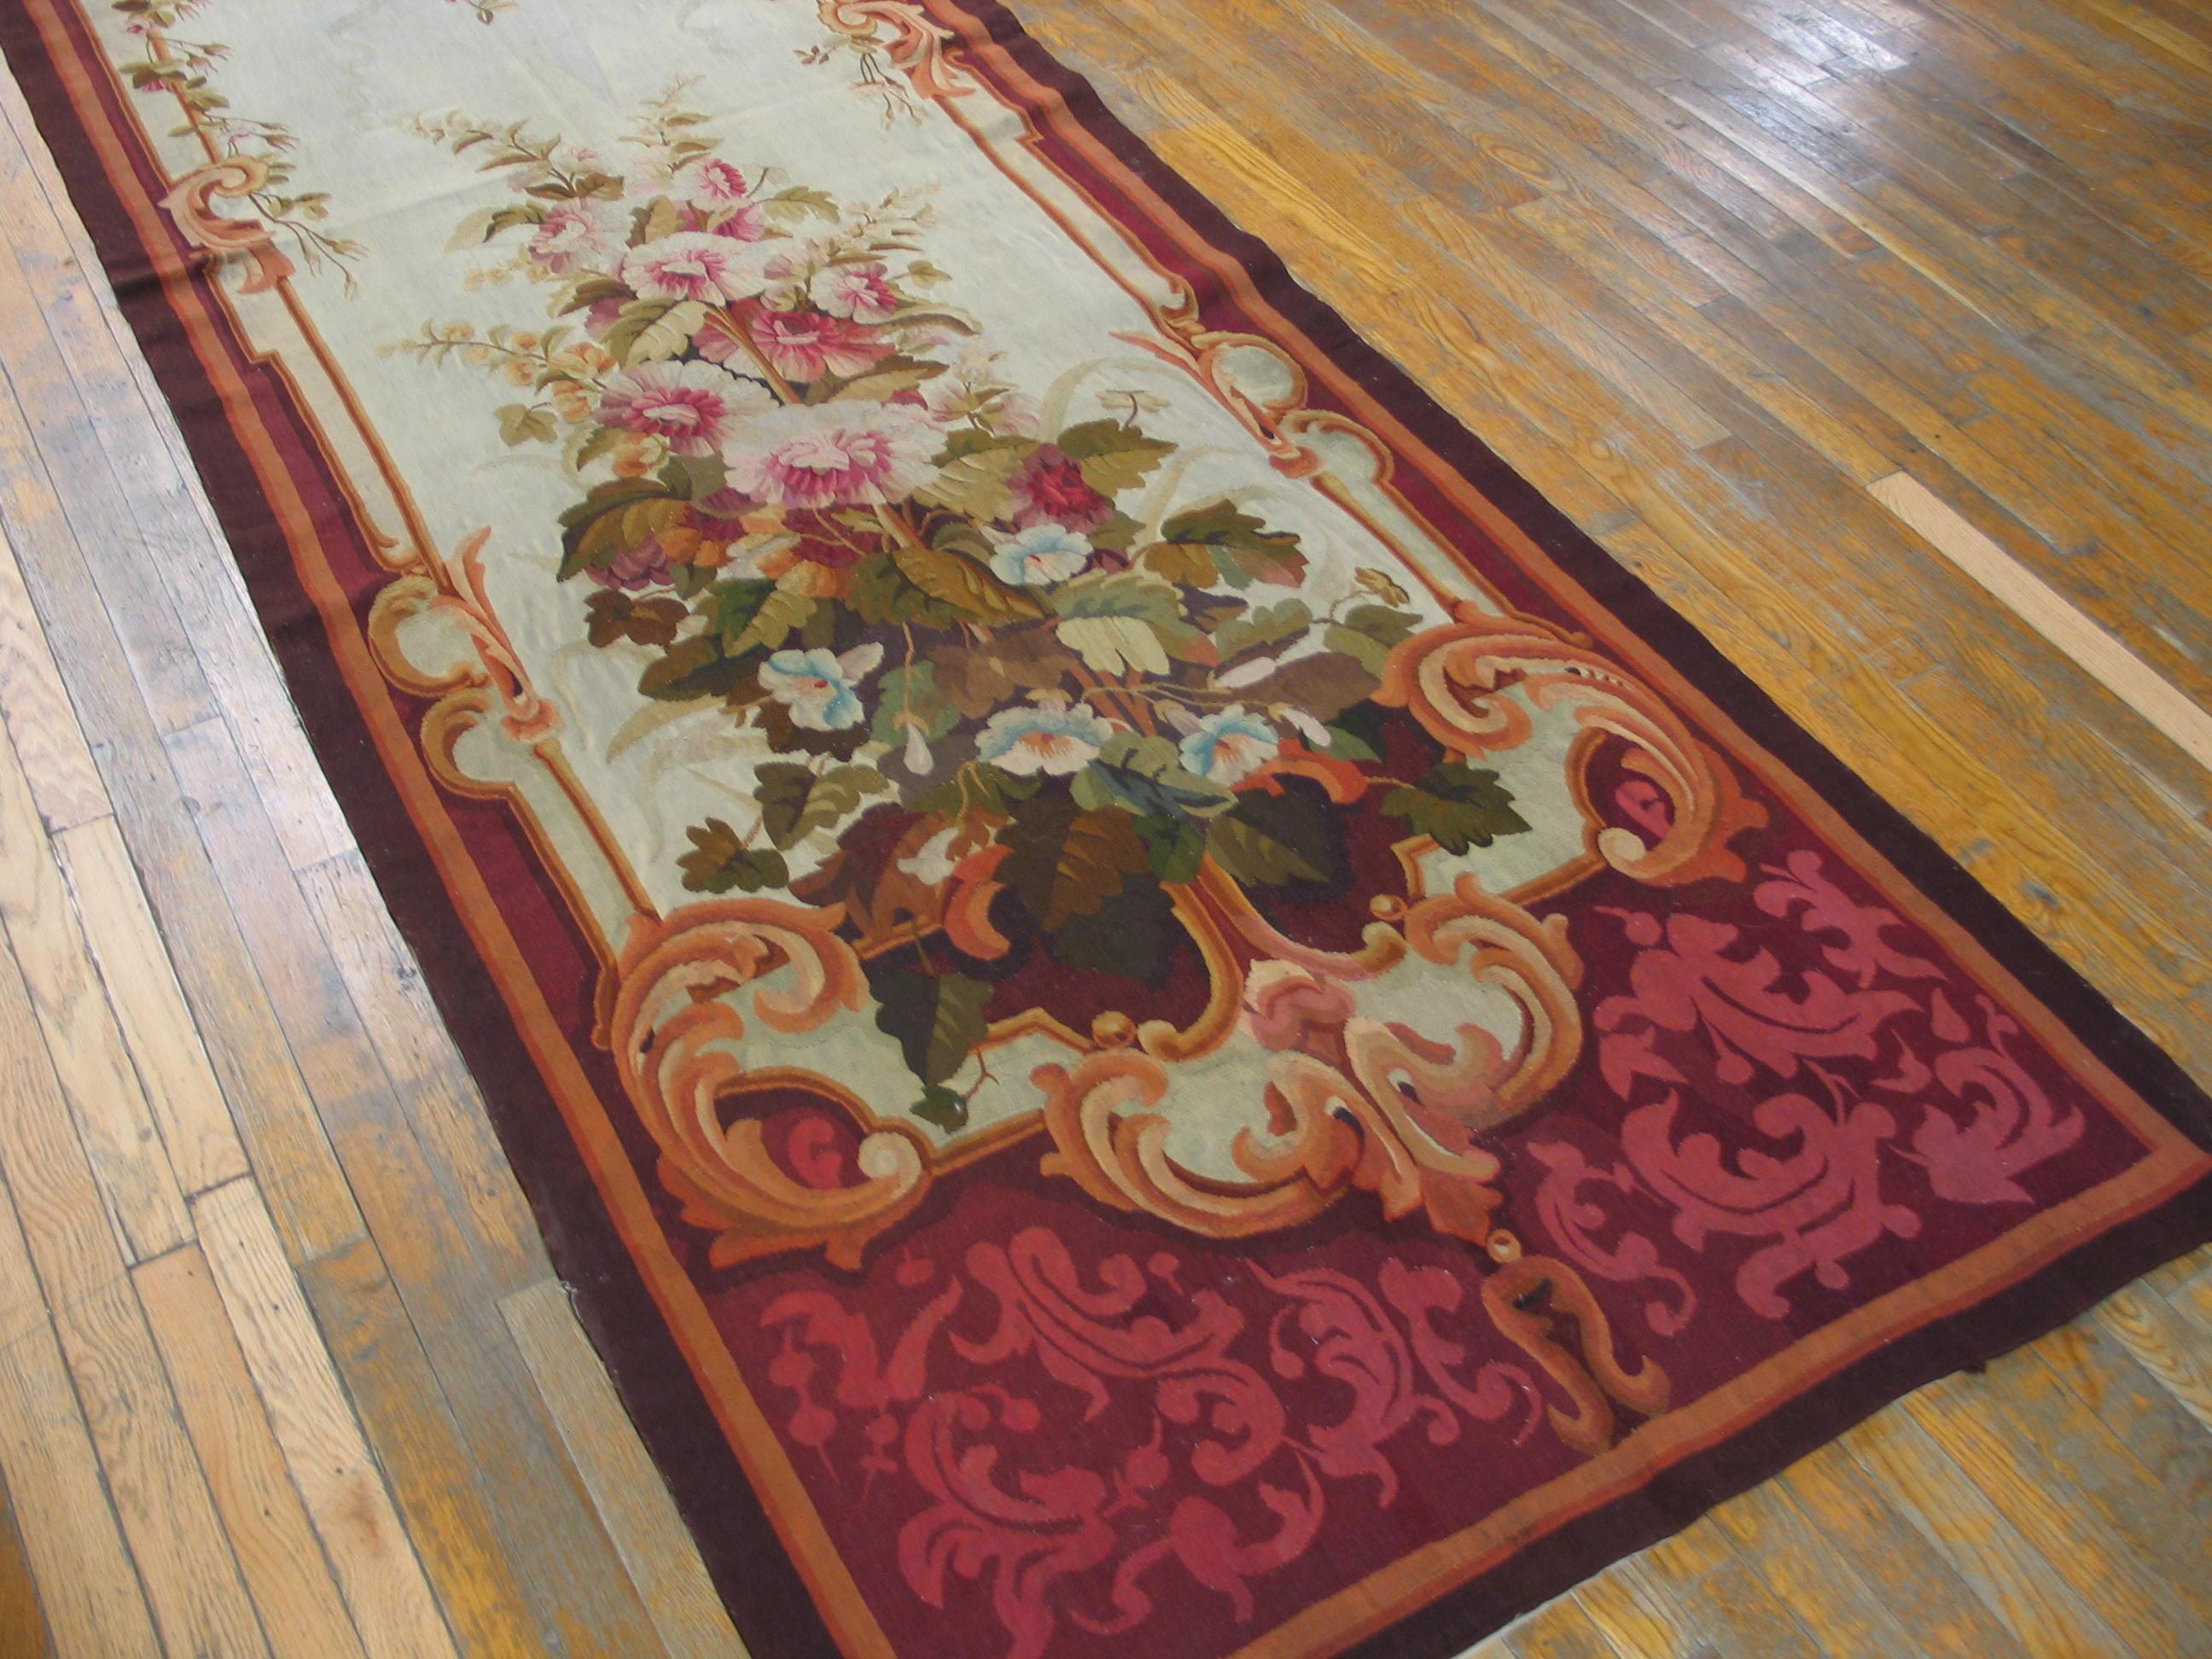 Hand-Woven Antique European Tapestry Rug 3' 9